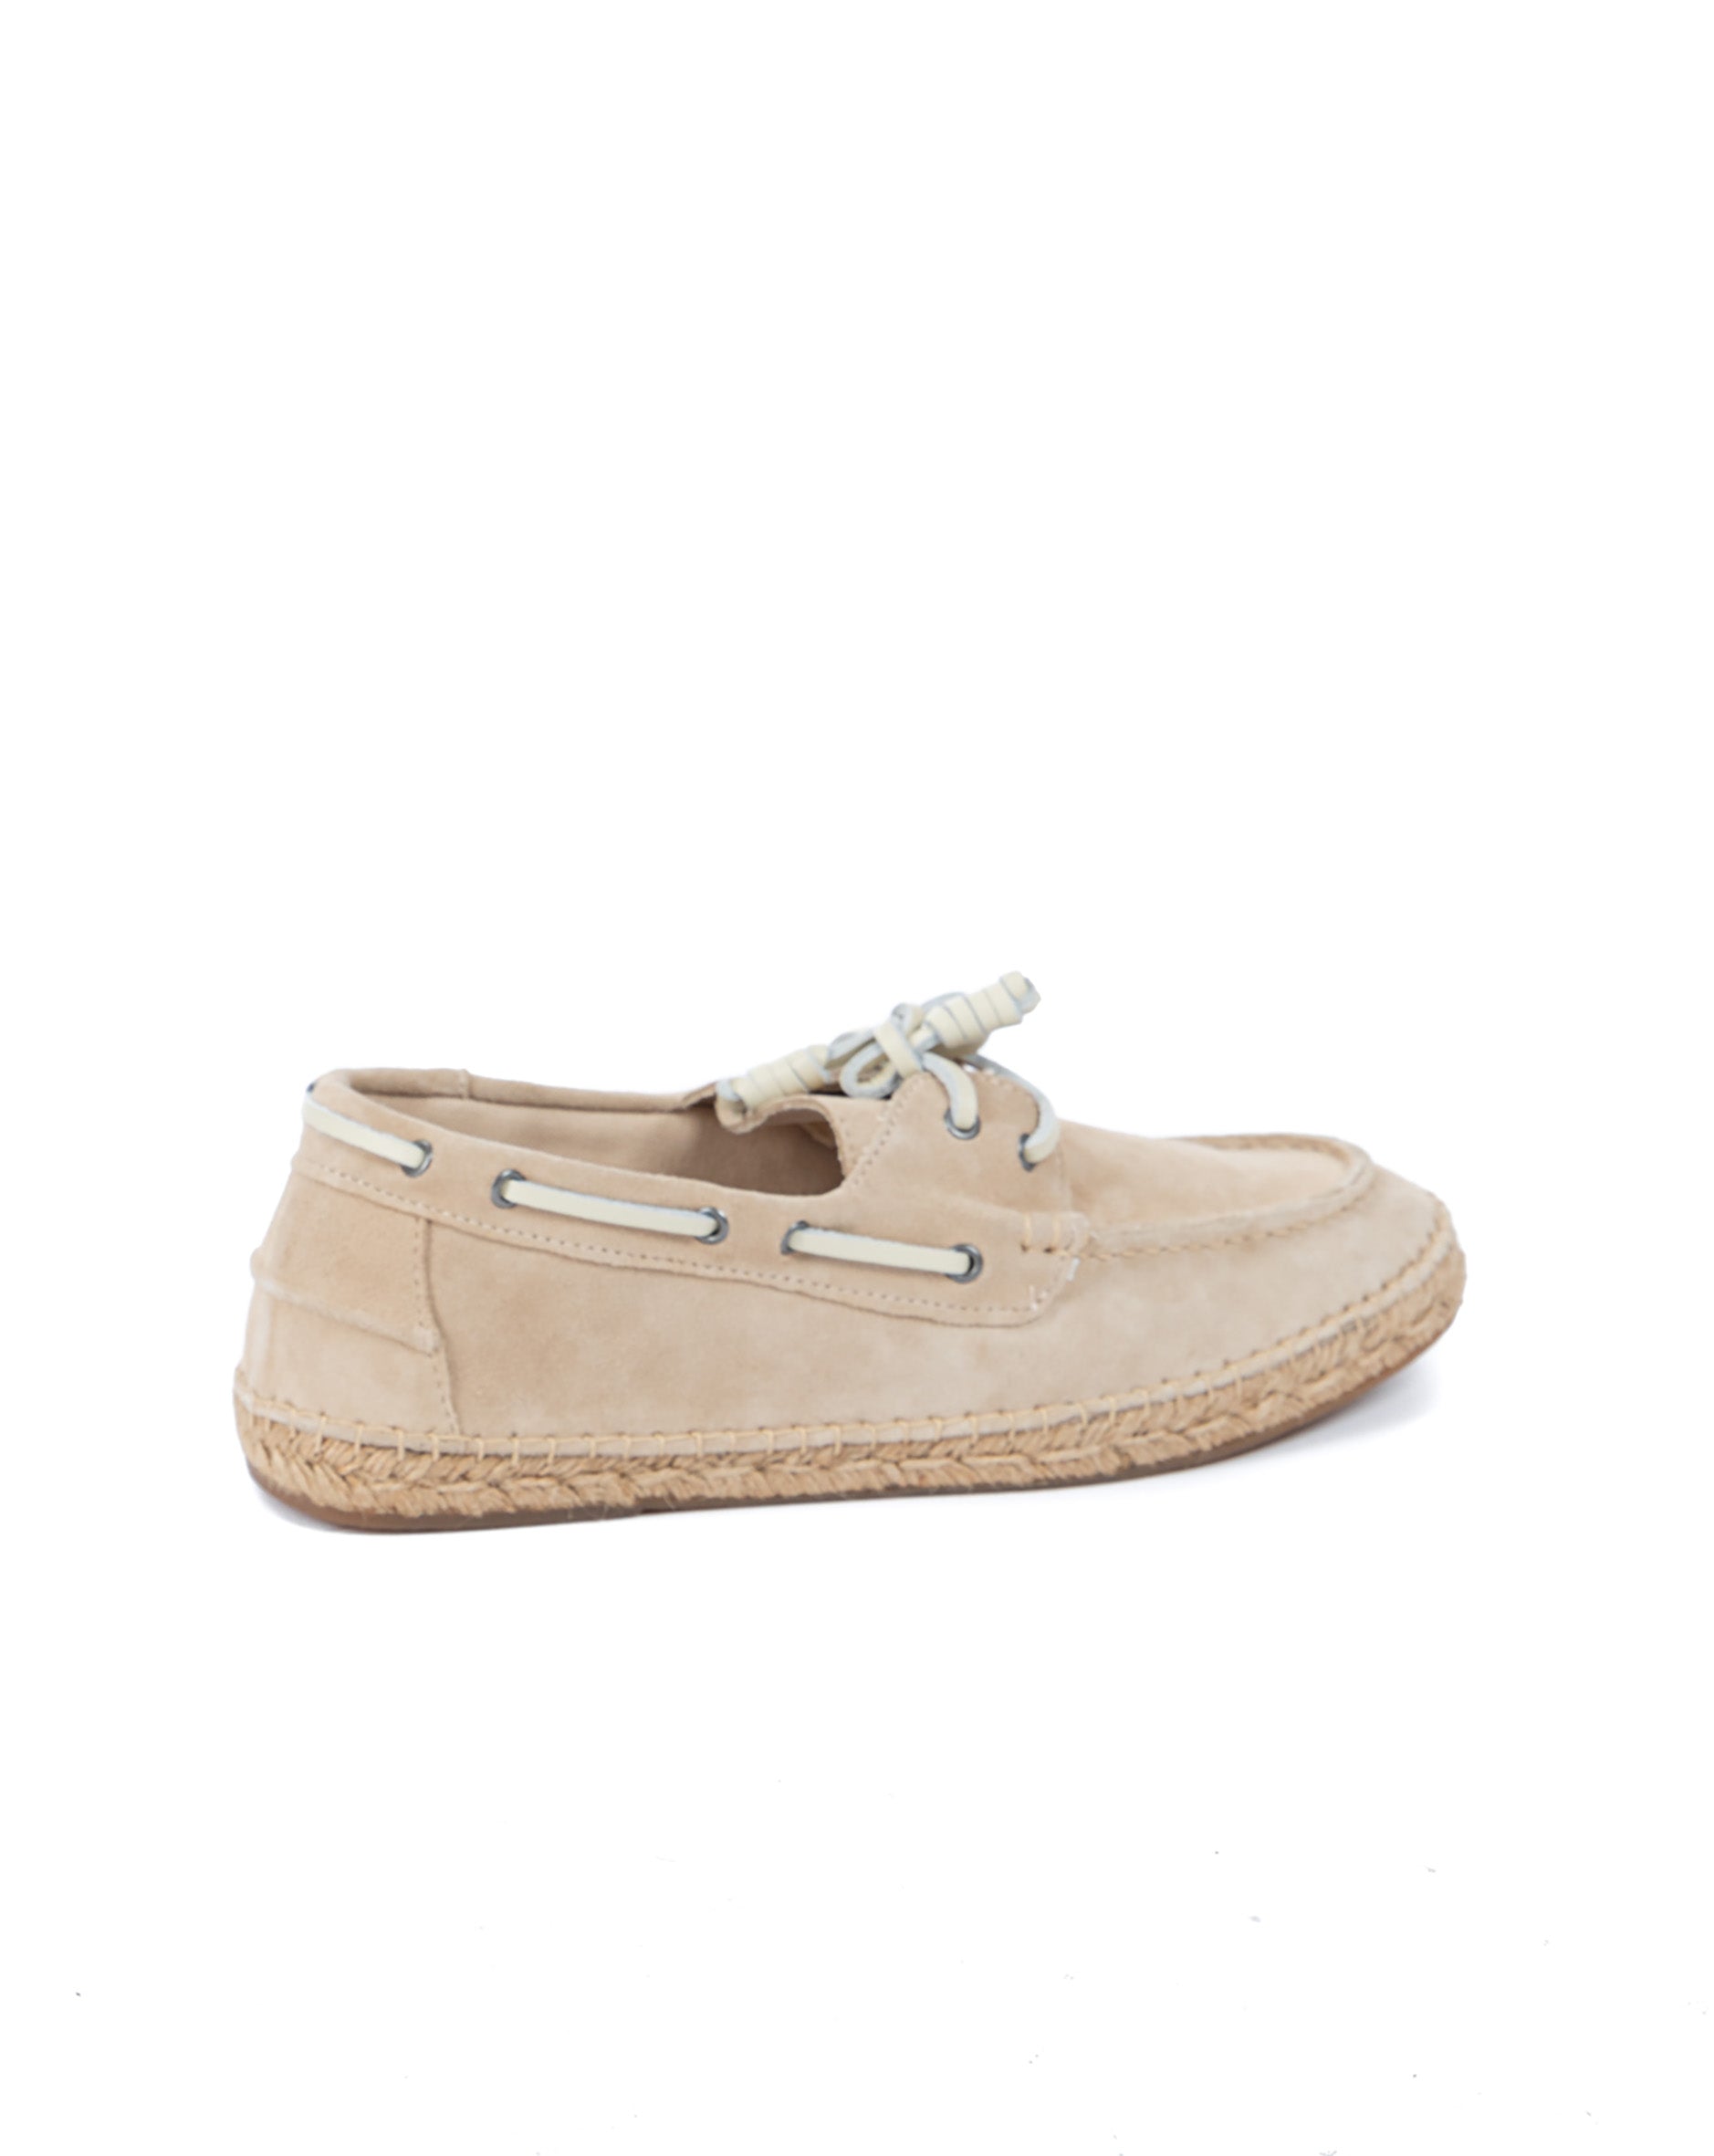 Pompeii - beige suede boat with rope bottom